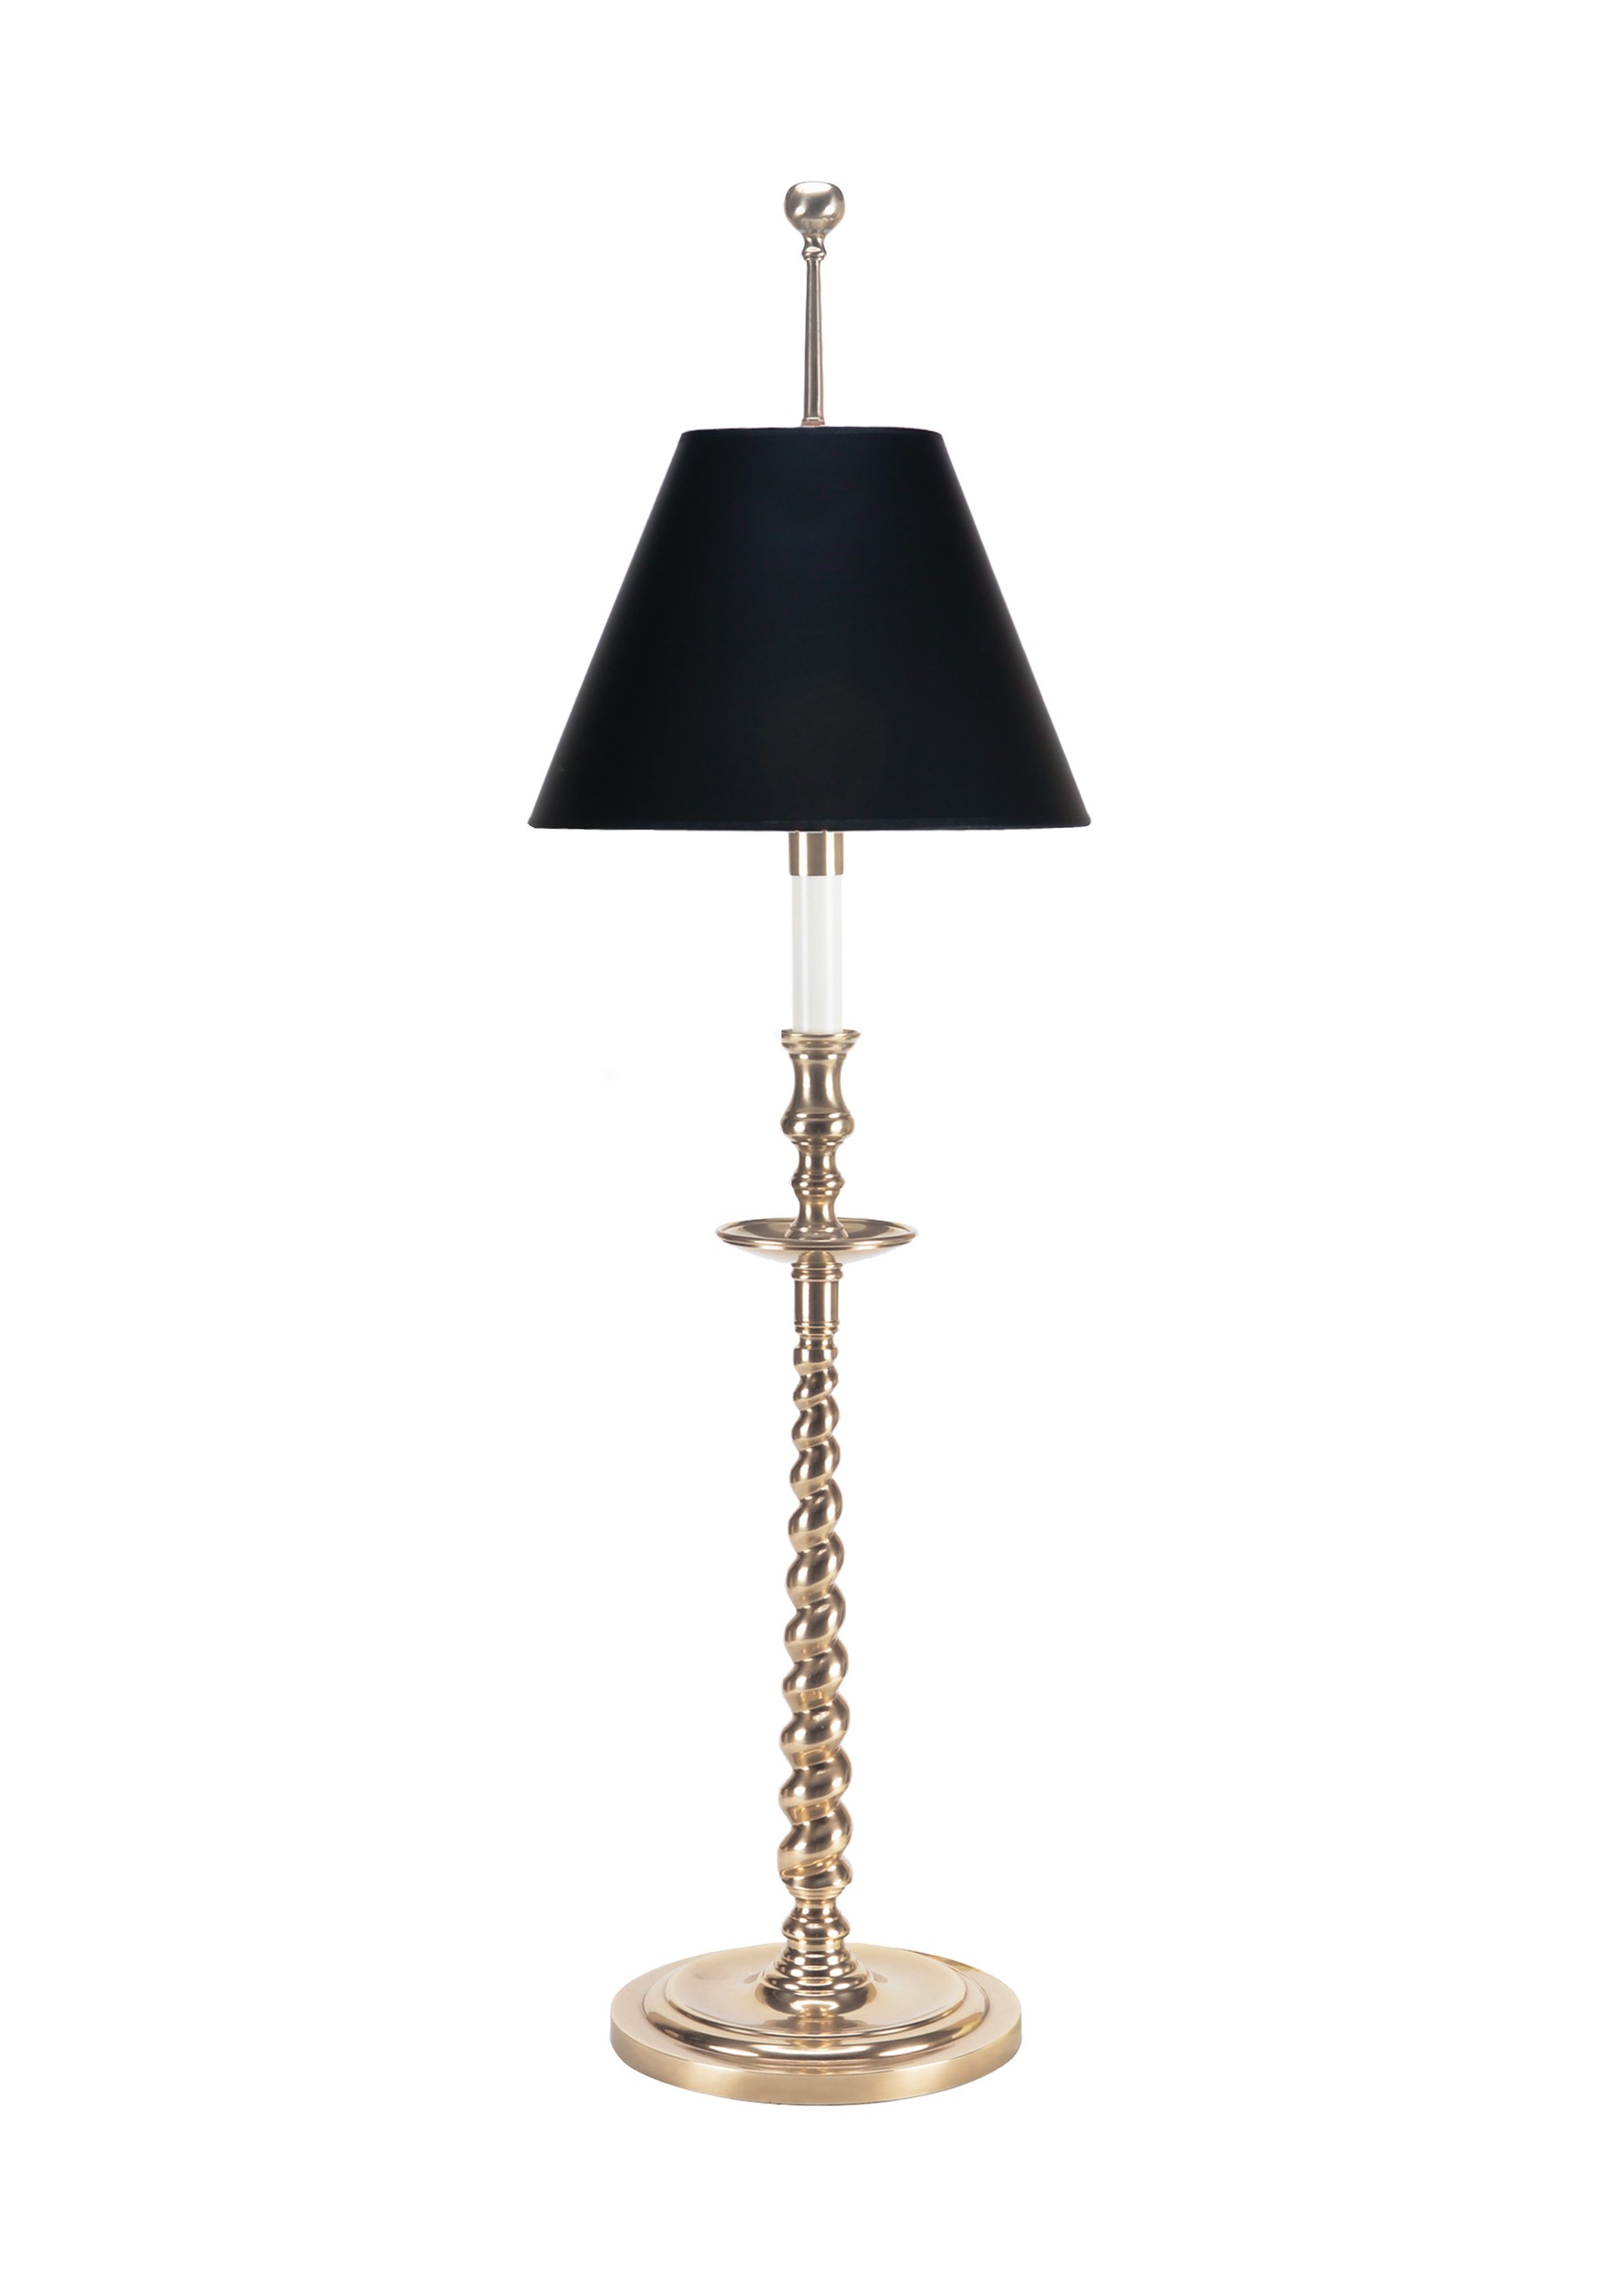 lamp reliable bedside lamps top supreme gold tall glamorous shades candlestick base black small with bases lighting replacement for table large interior skinny appealing blue grey